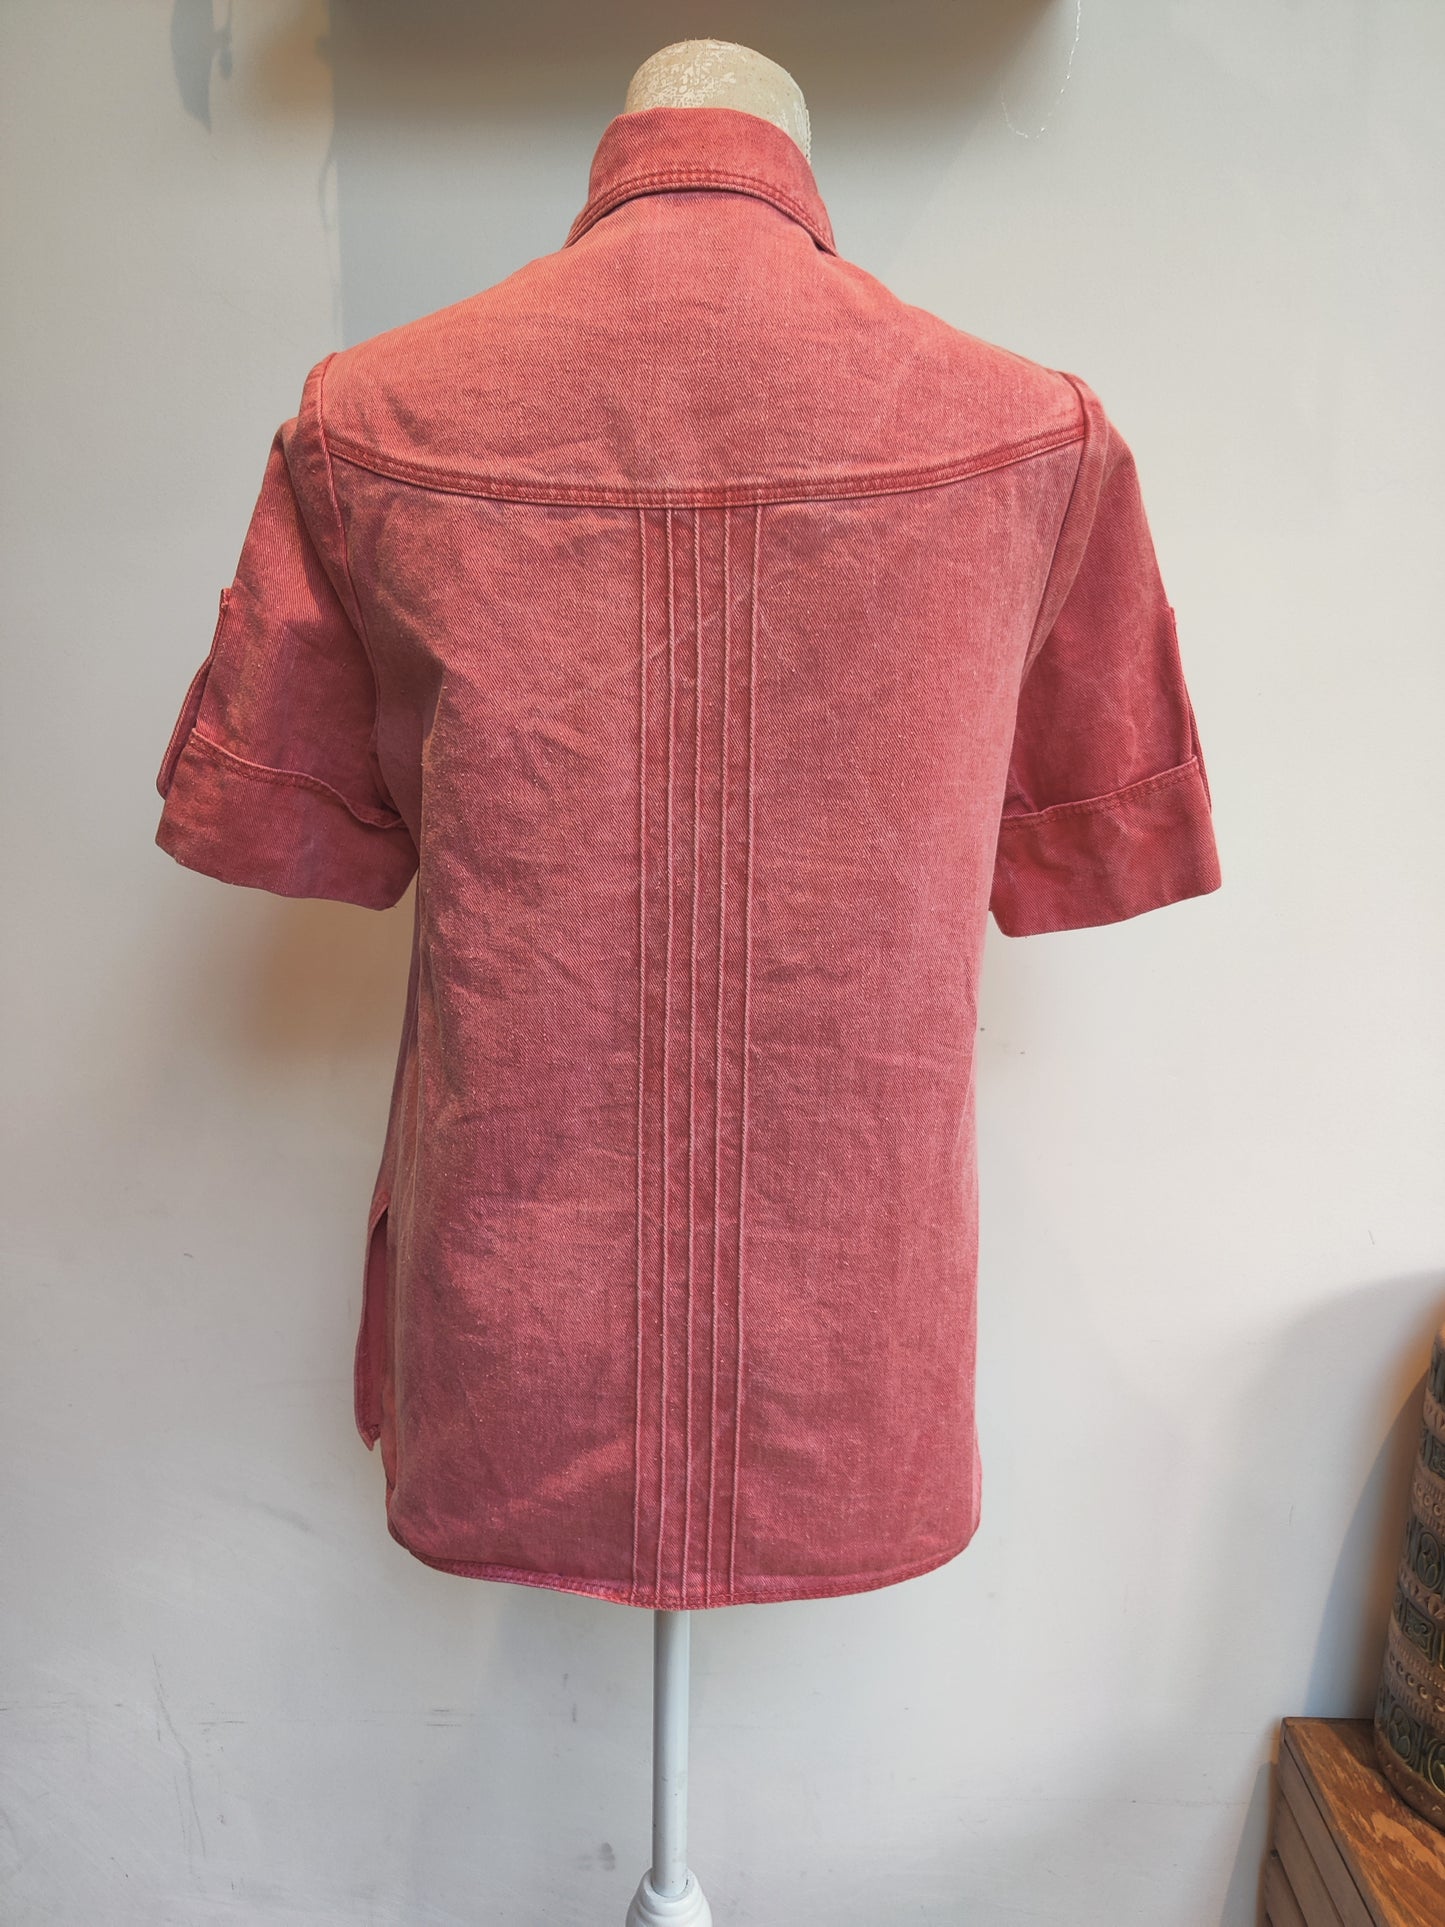 70s denim jacket with short sleeves in red.